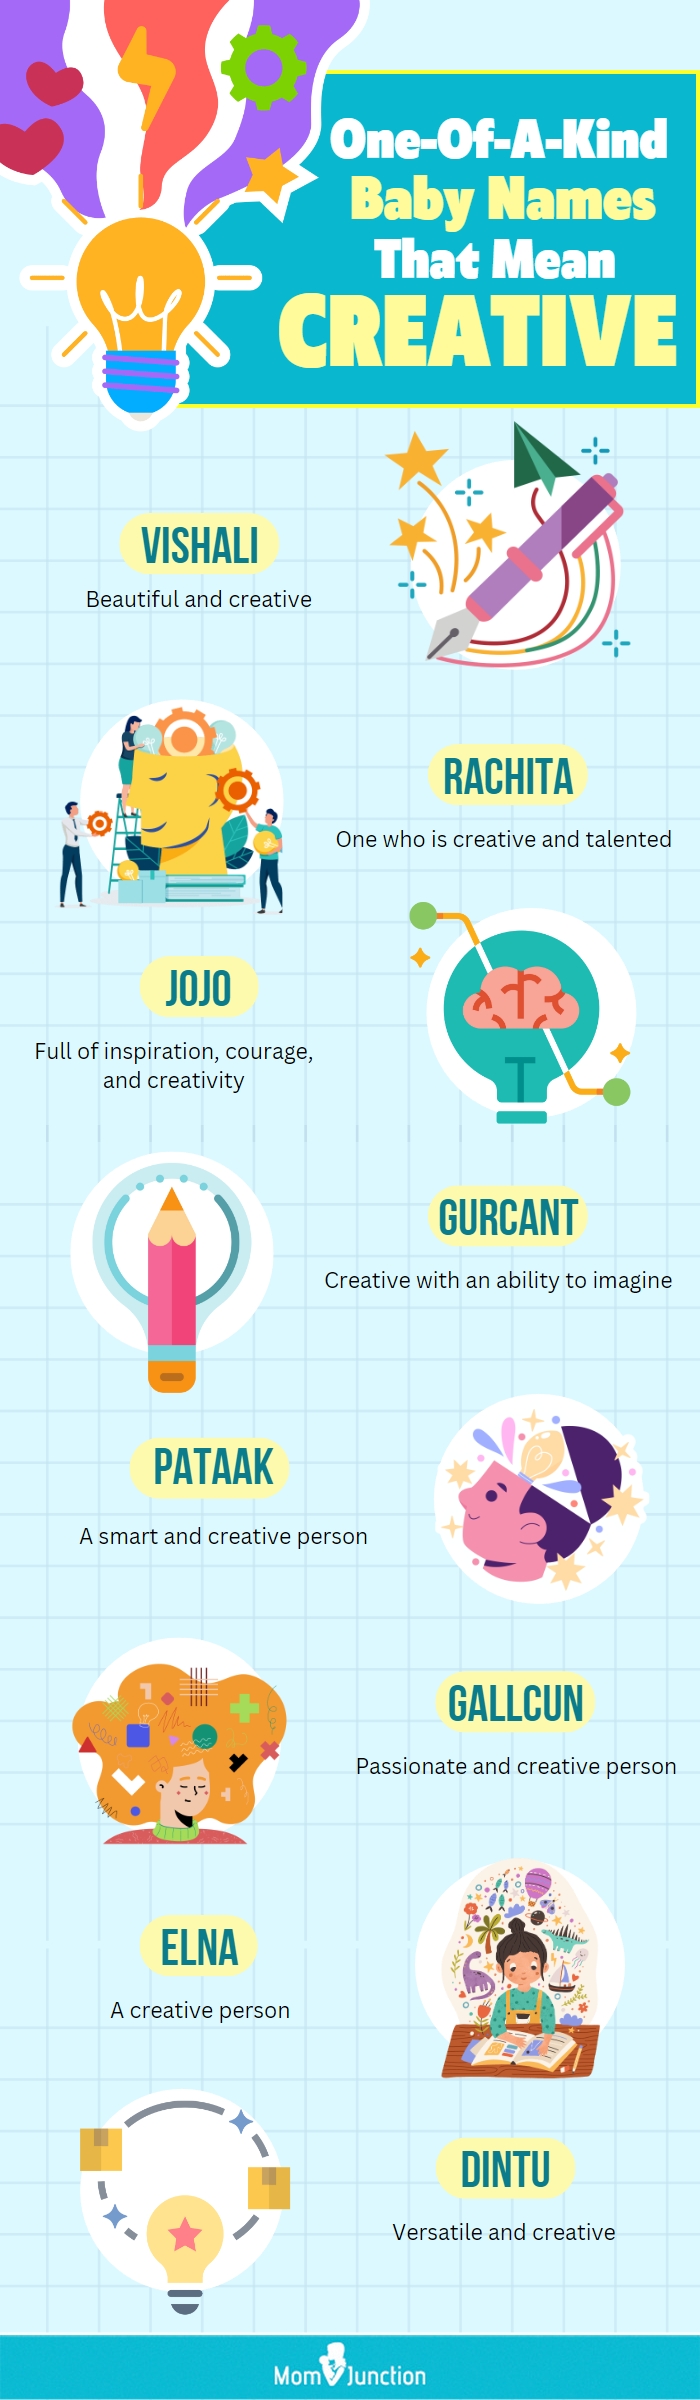 one of a kind baby names that mean creative (infographic)